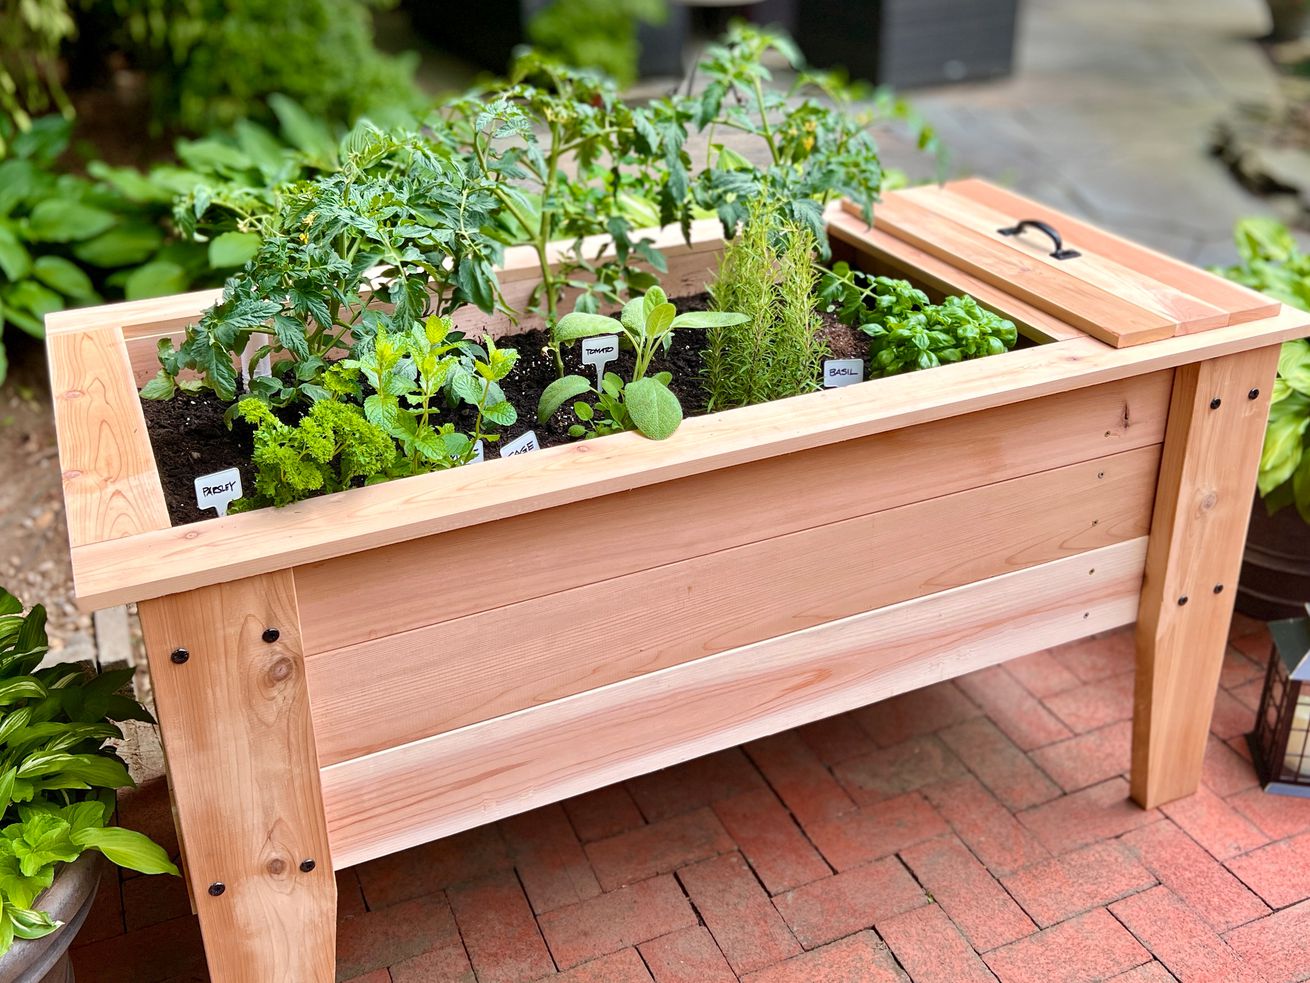 How to Build a Self-Watering Planter